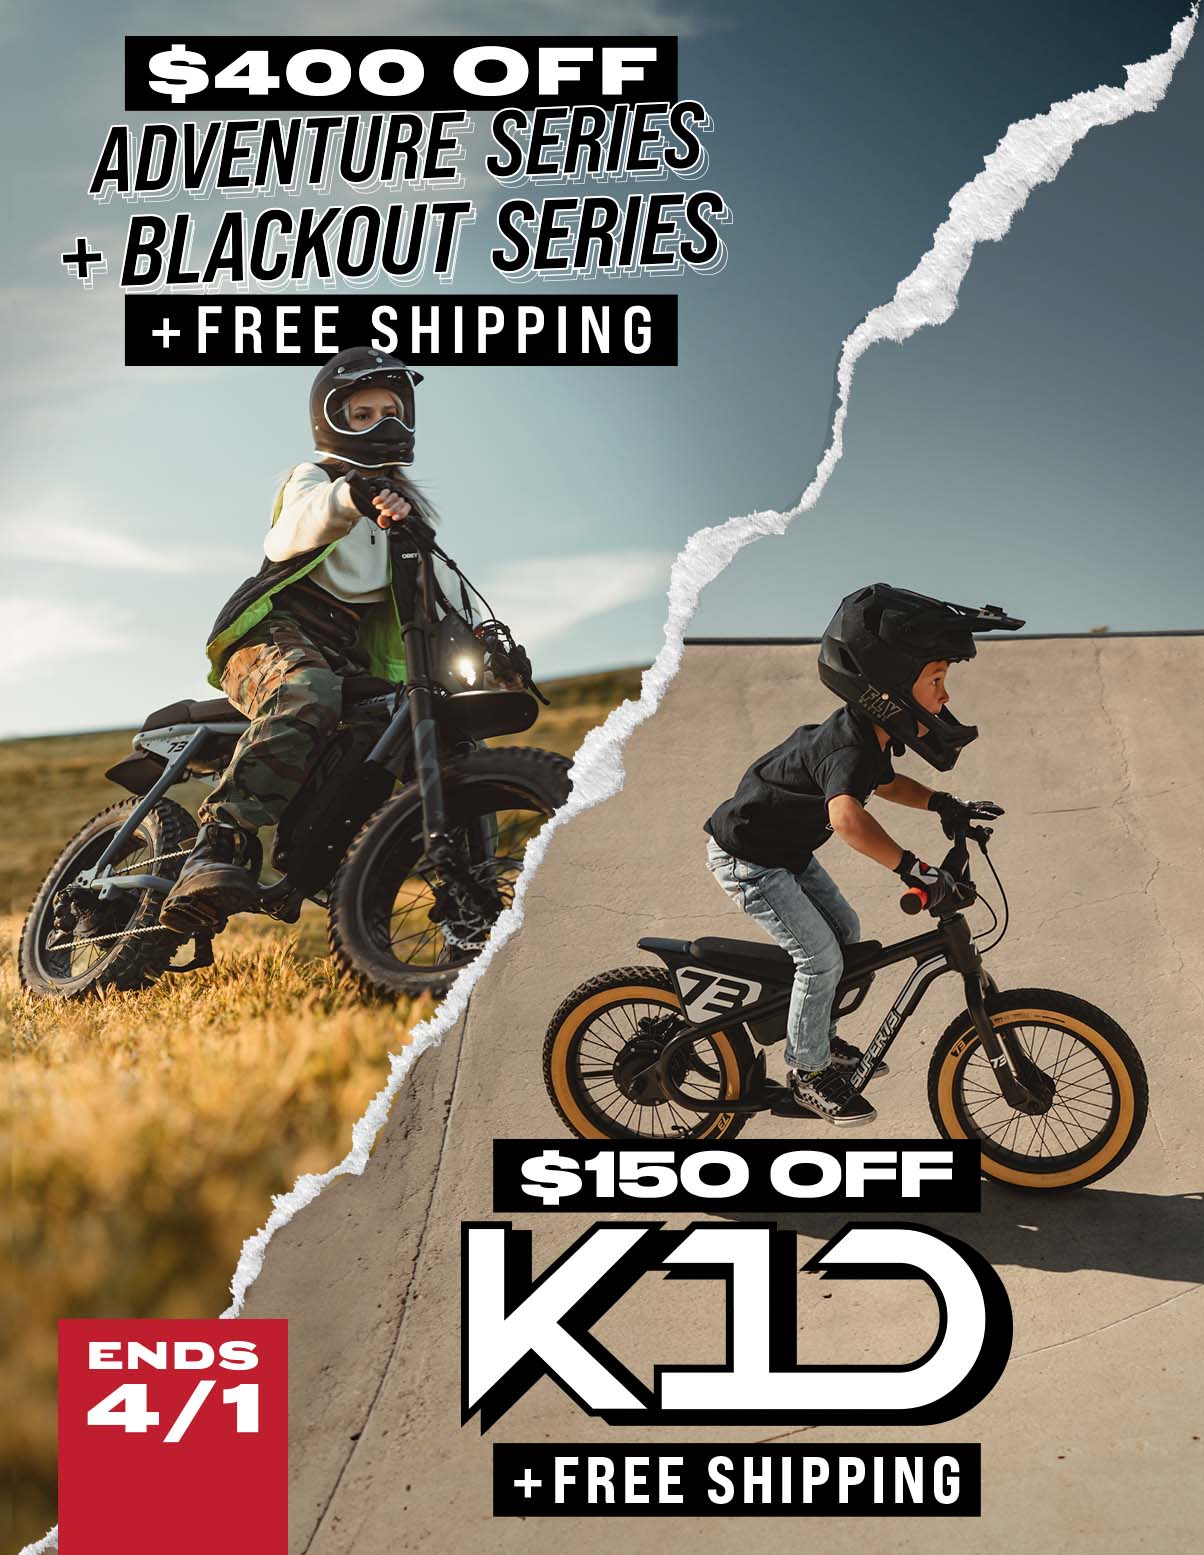 Promotional graphic showing $400 off Adventure and Blackout Series bikes plus $150 off K1D and free shipping